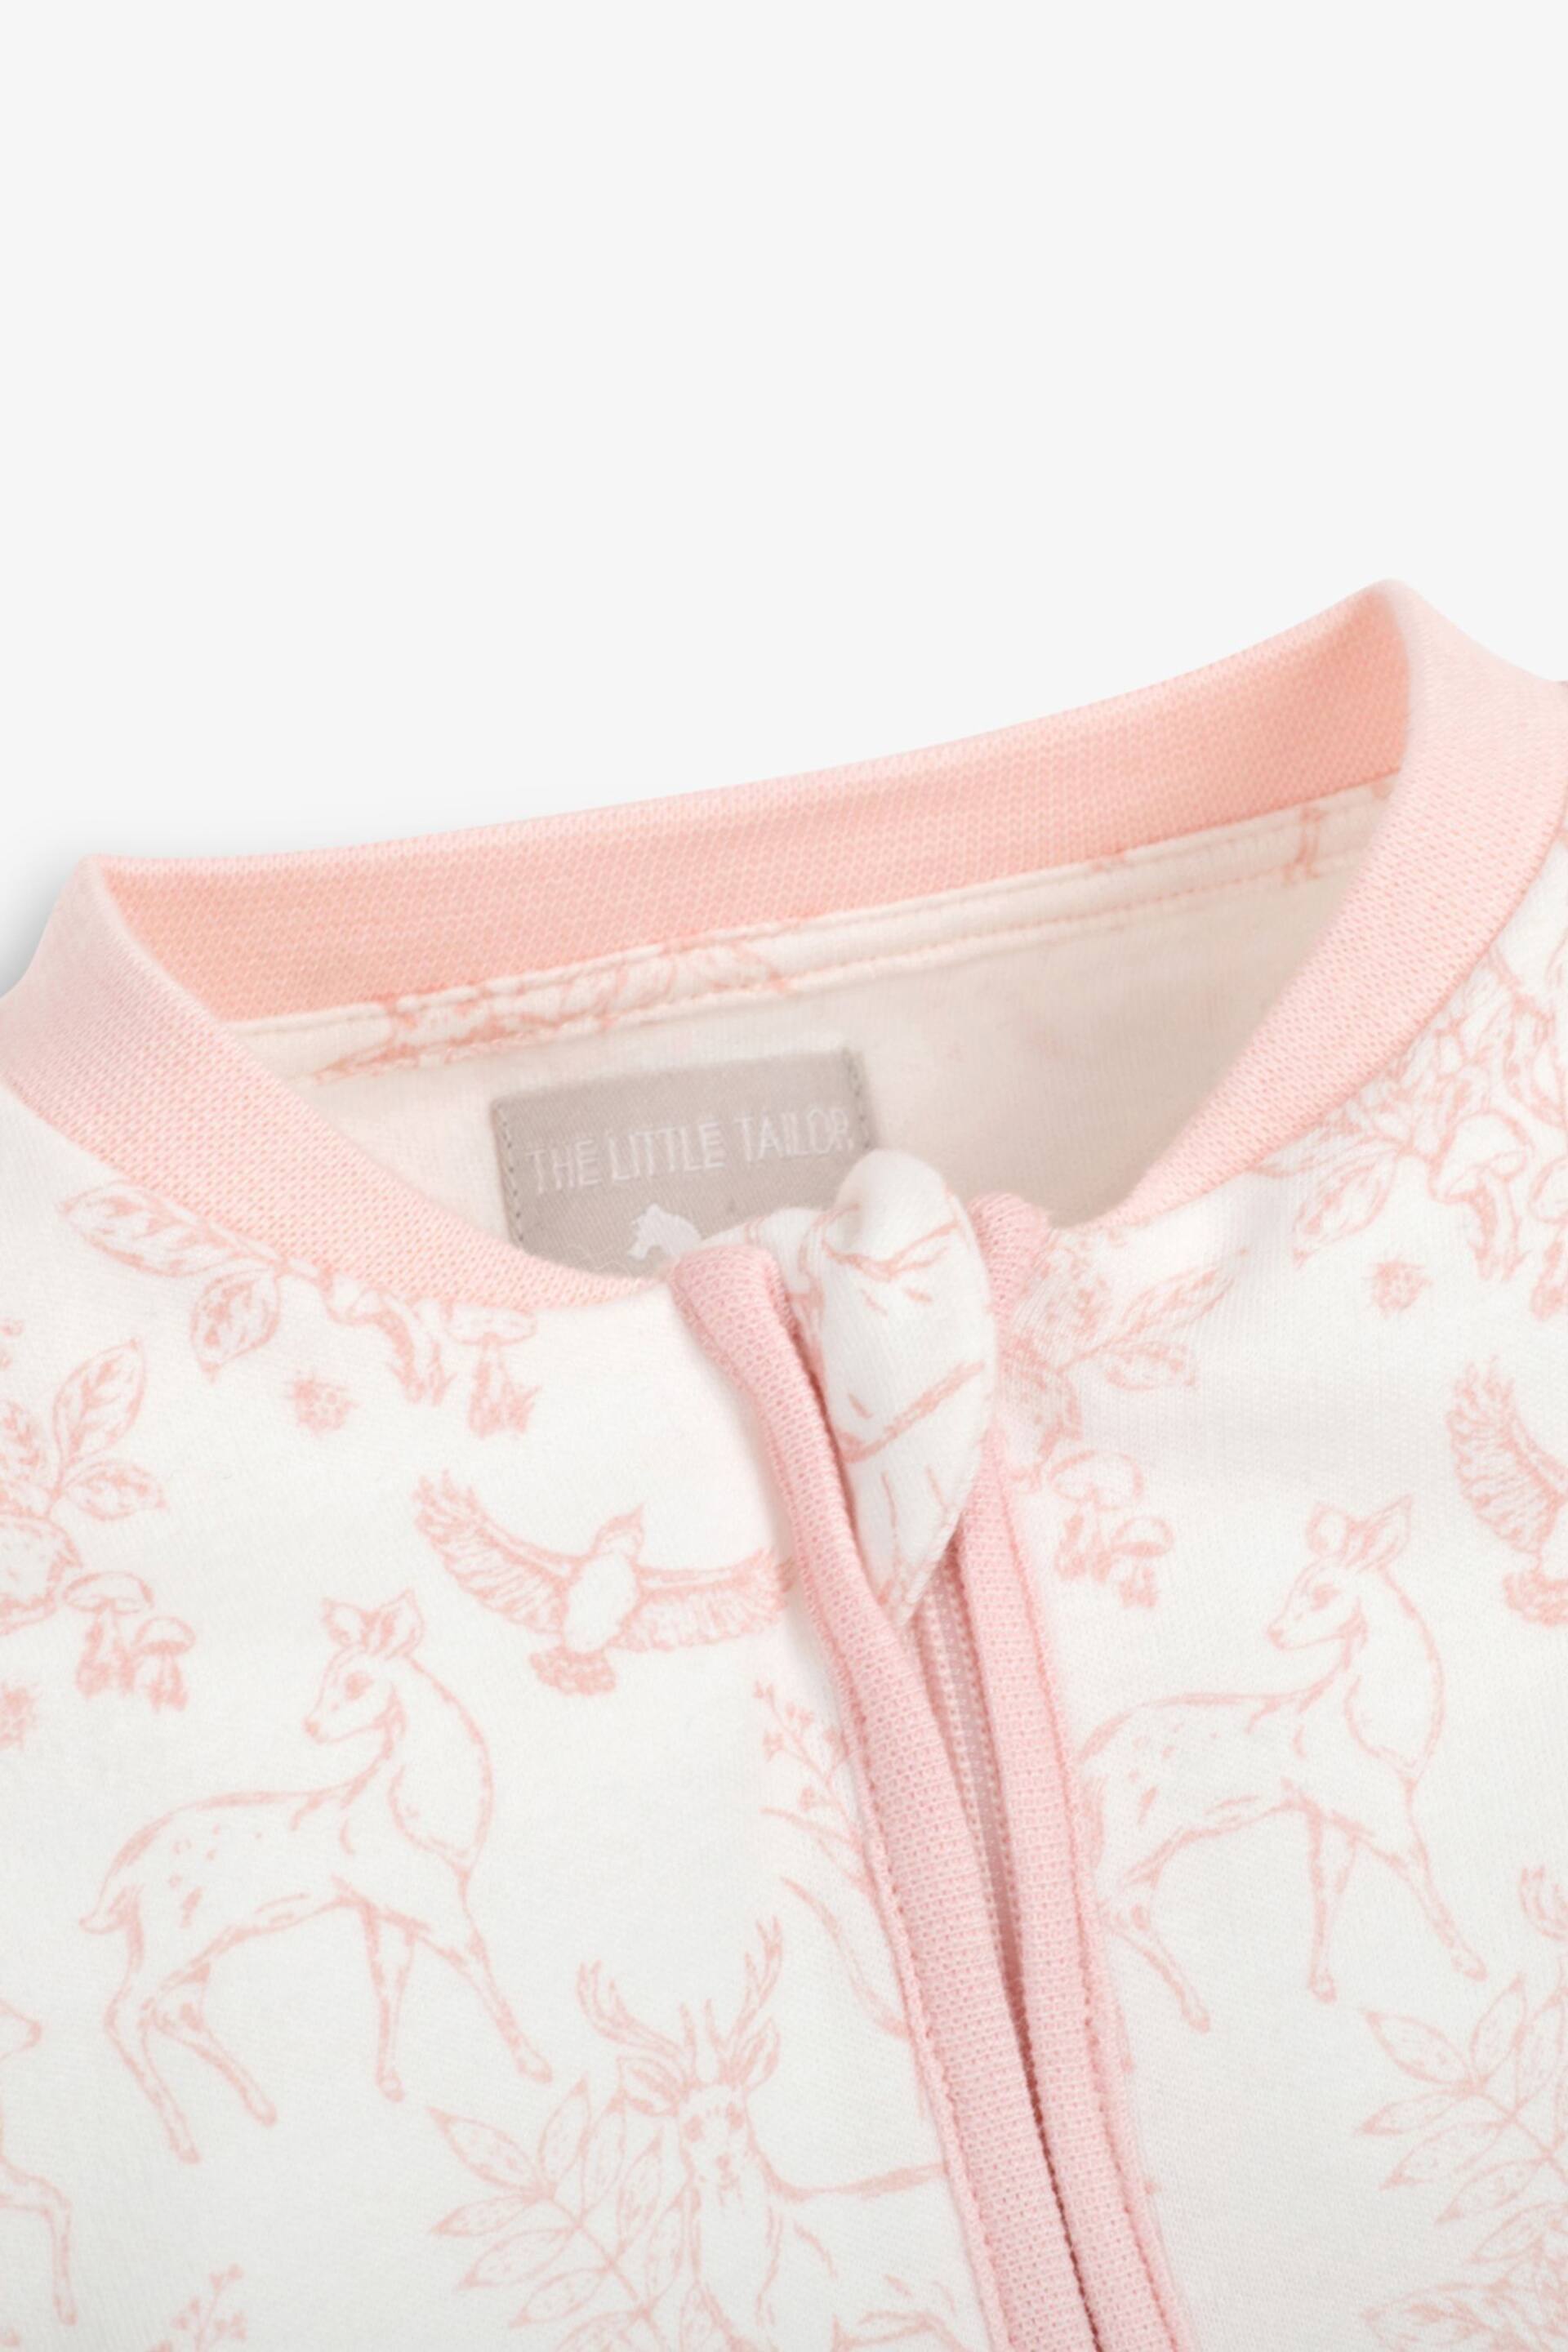 The Little Tailor Baby Front Zip Easter Bunny Print Soft Cotton Sleepsuit - Image 4 of 5